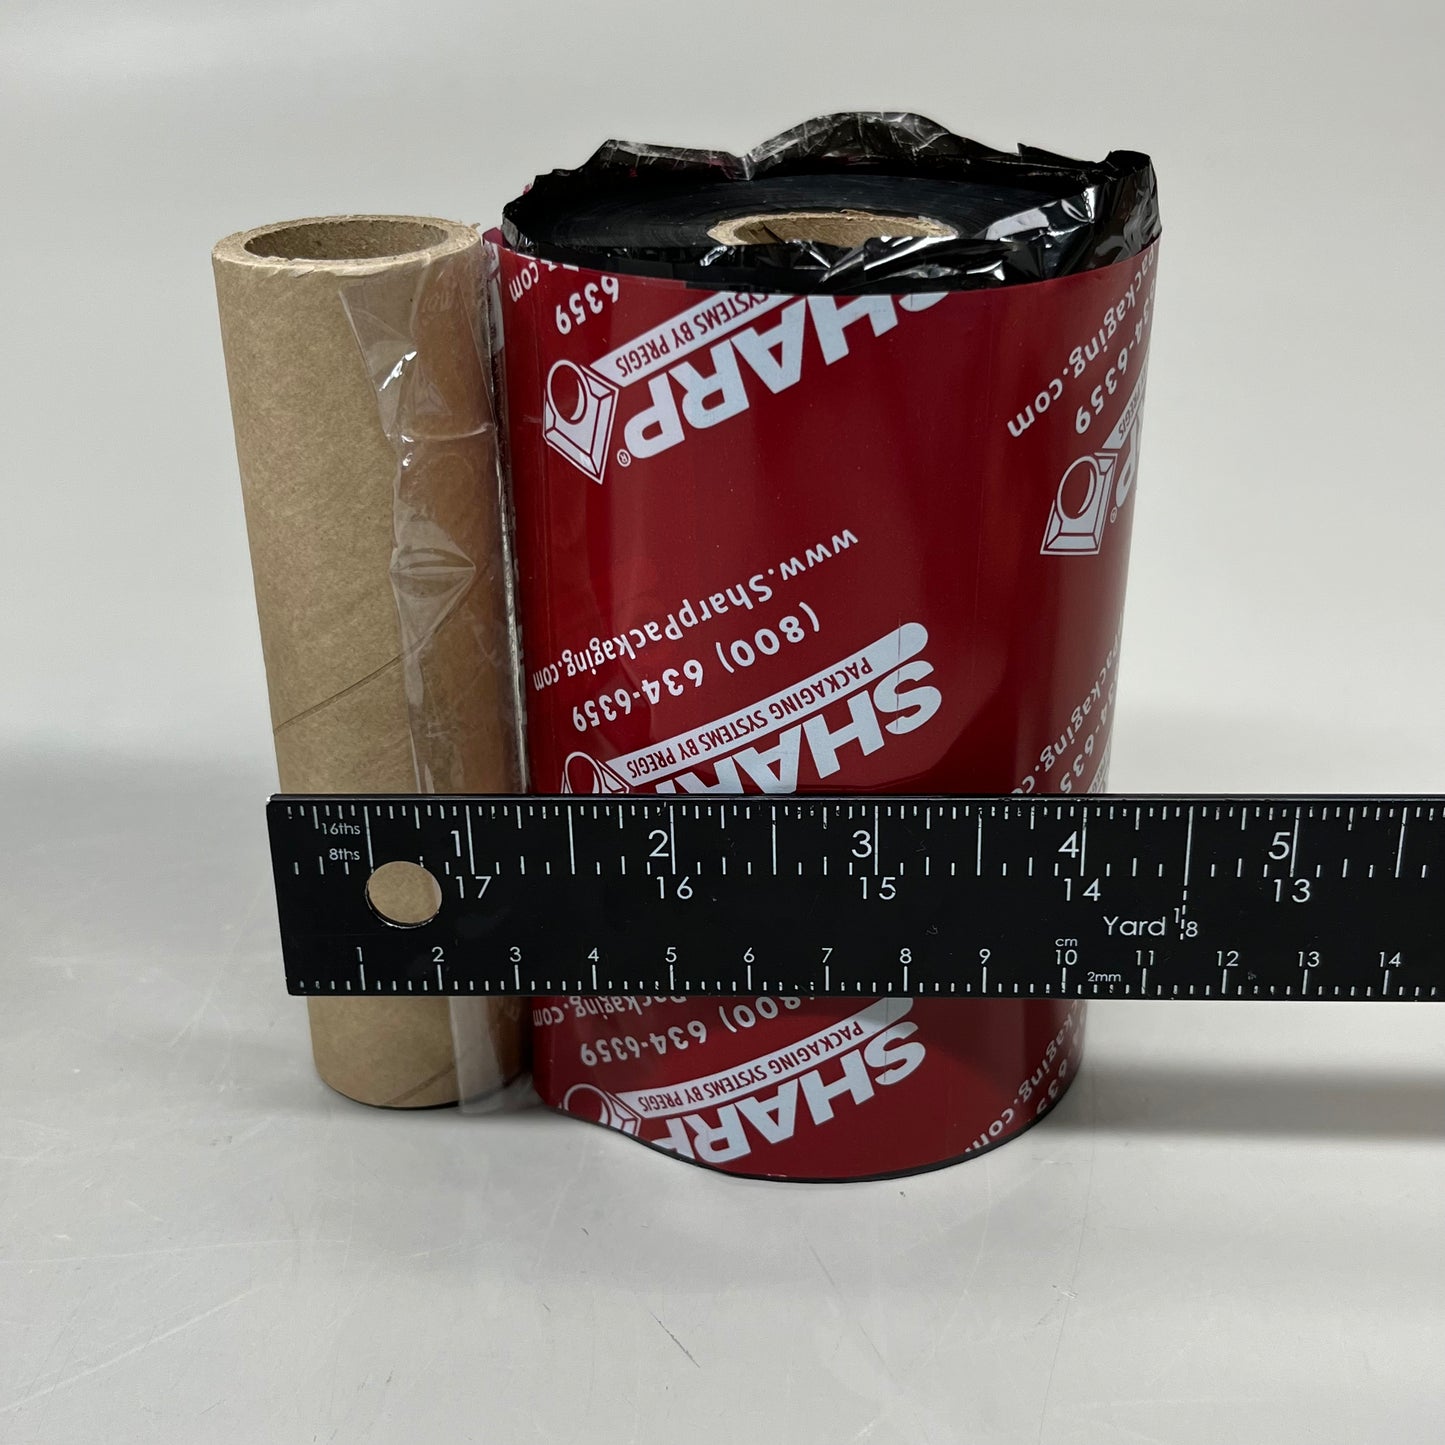 SHARP 2-PACK! Packaging Systems Thermal Transfer Ribbon 4.72" x 2001' Black 869216-02 New